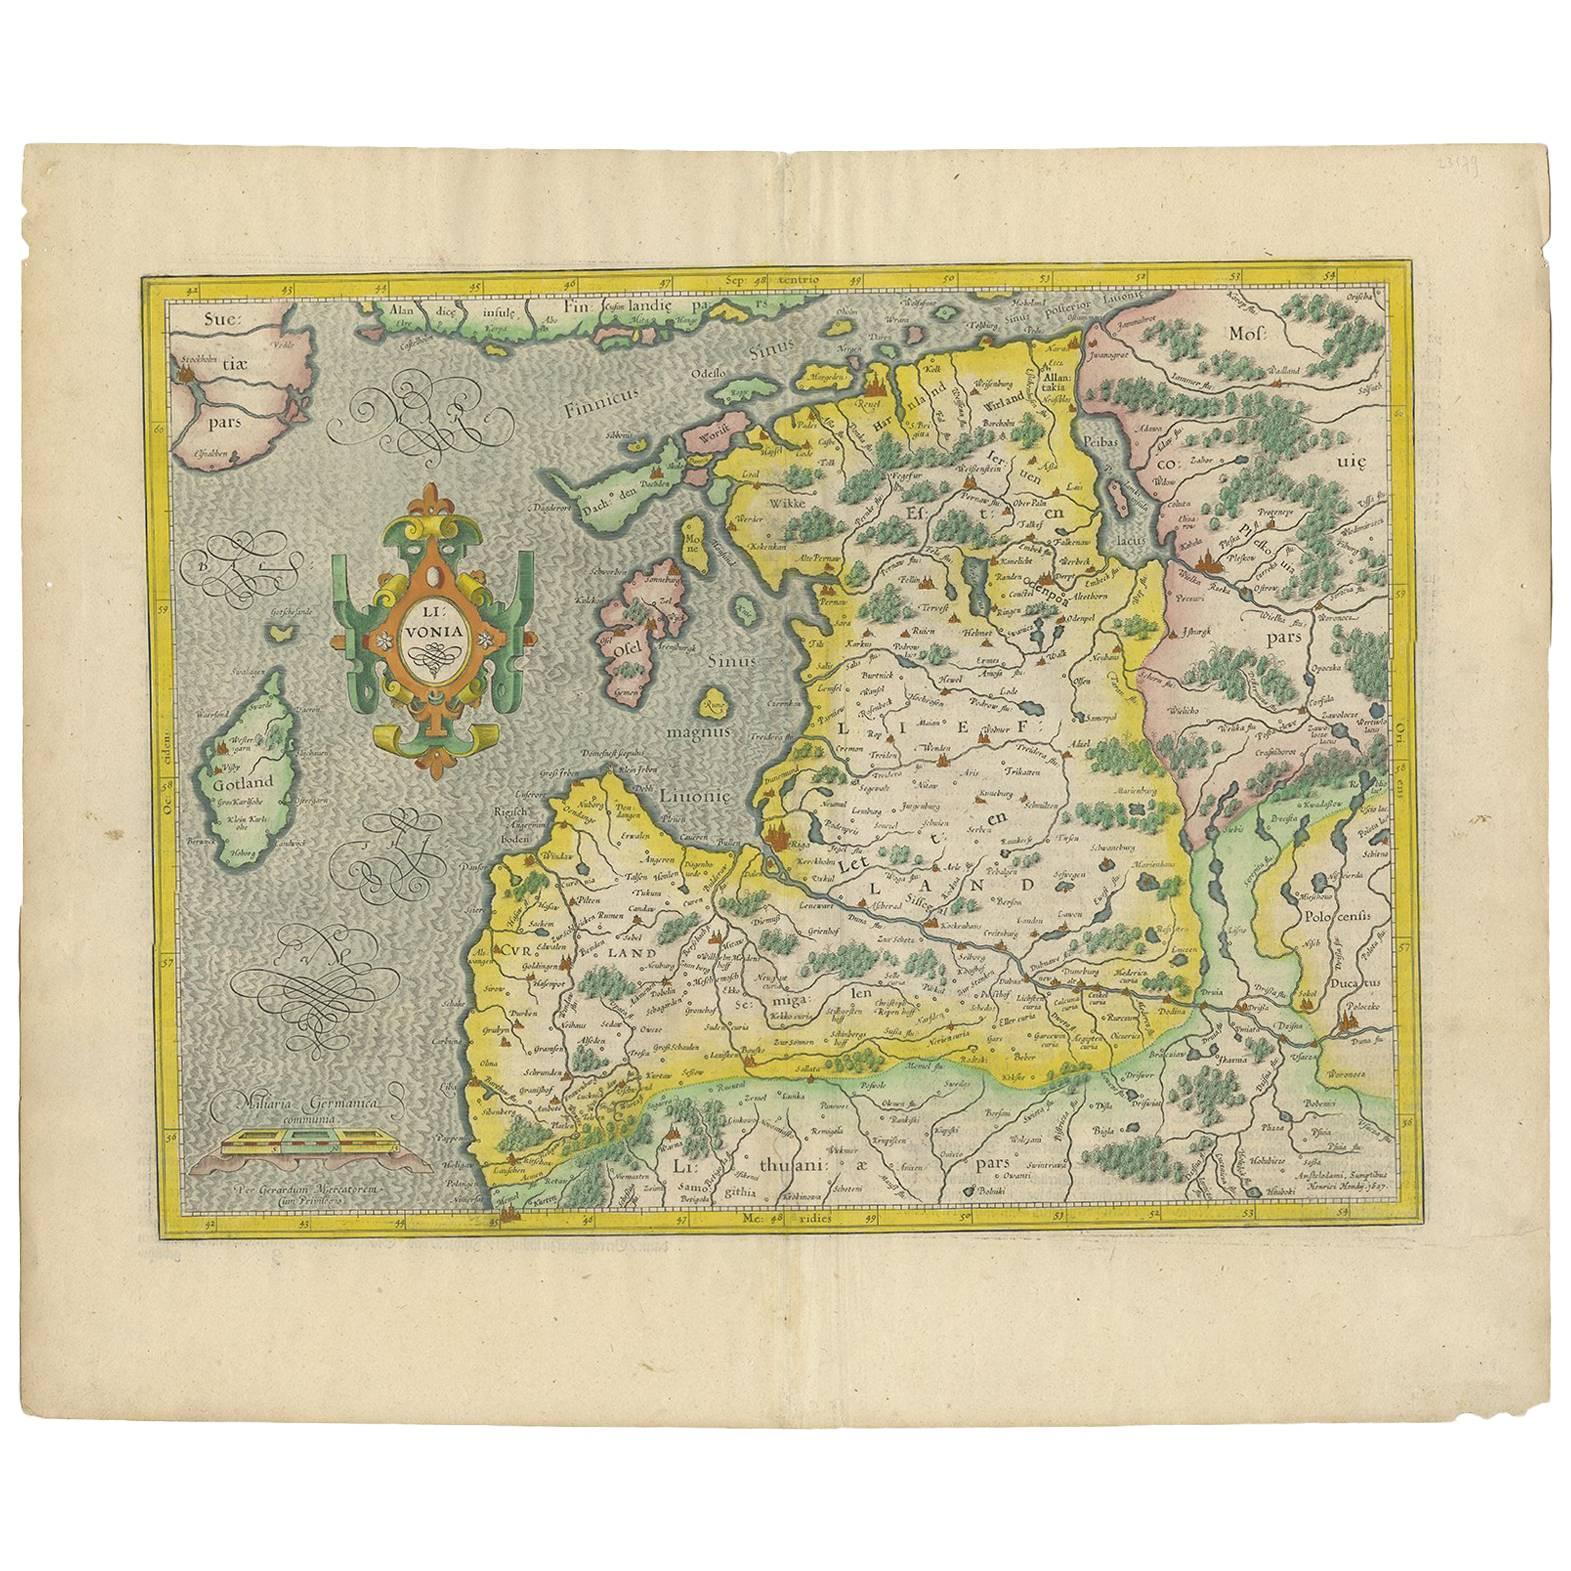 Antique Map of the northern Baltic region by H. Hondius, 1627